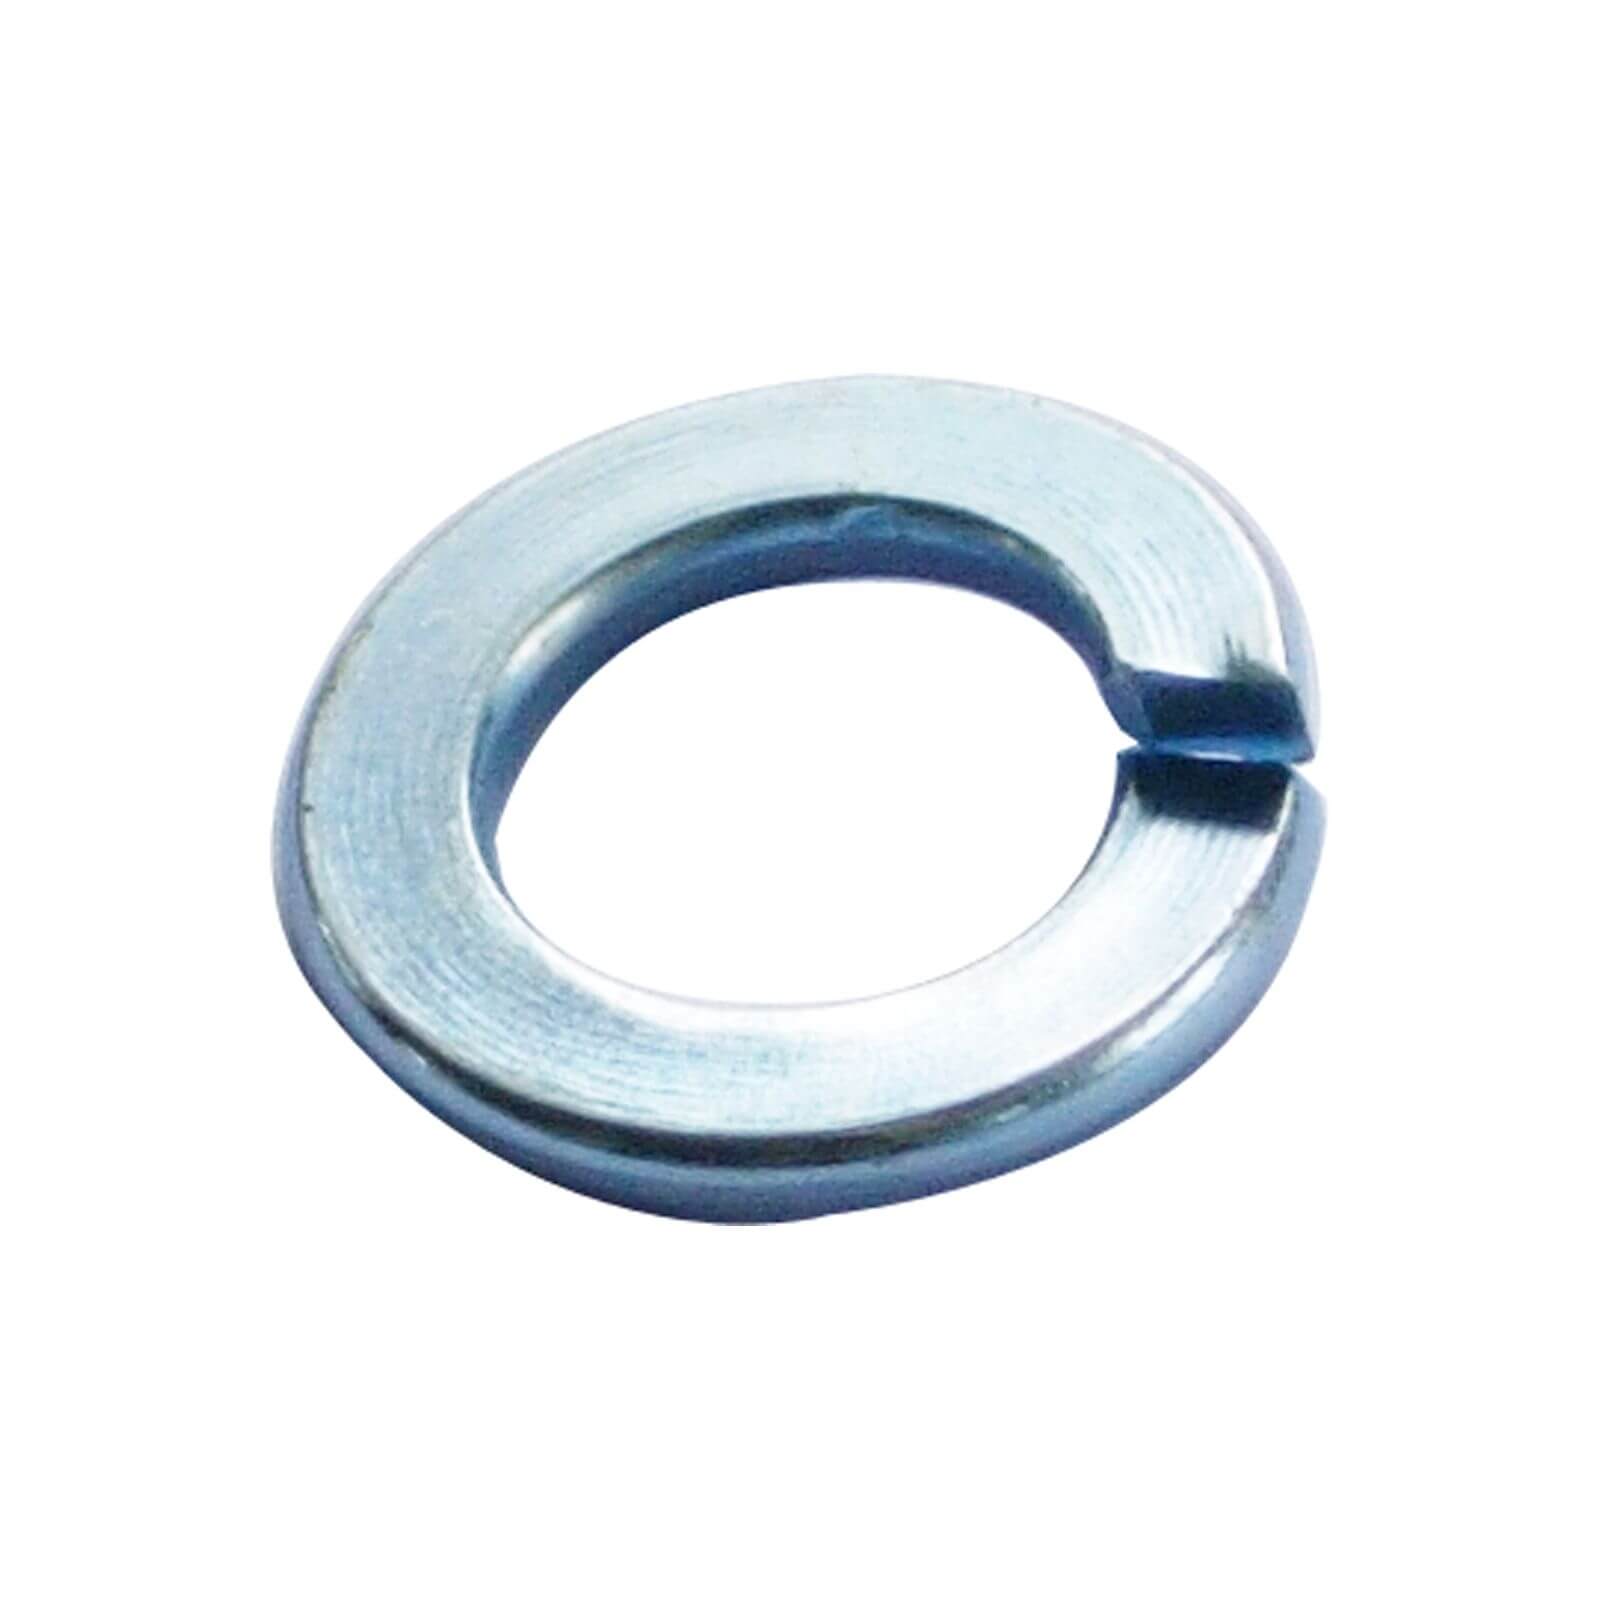 Spring Washer - Bright Zinc Plated - M6 - 25 Pack